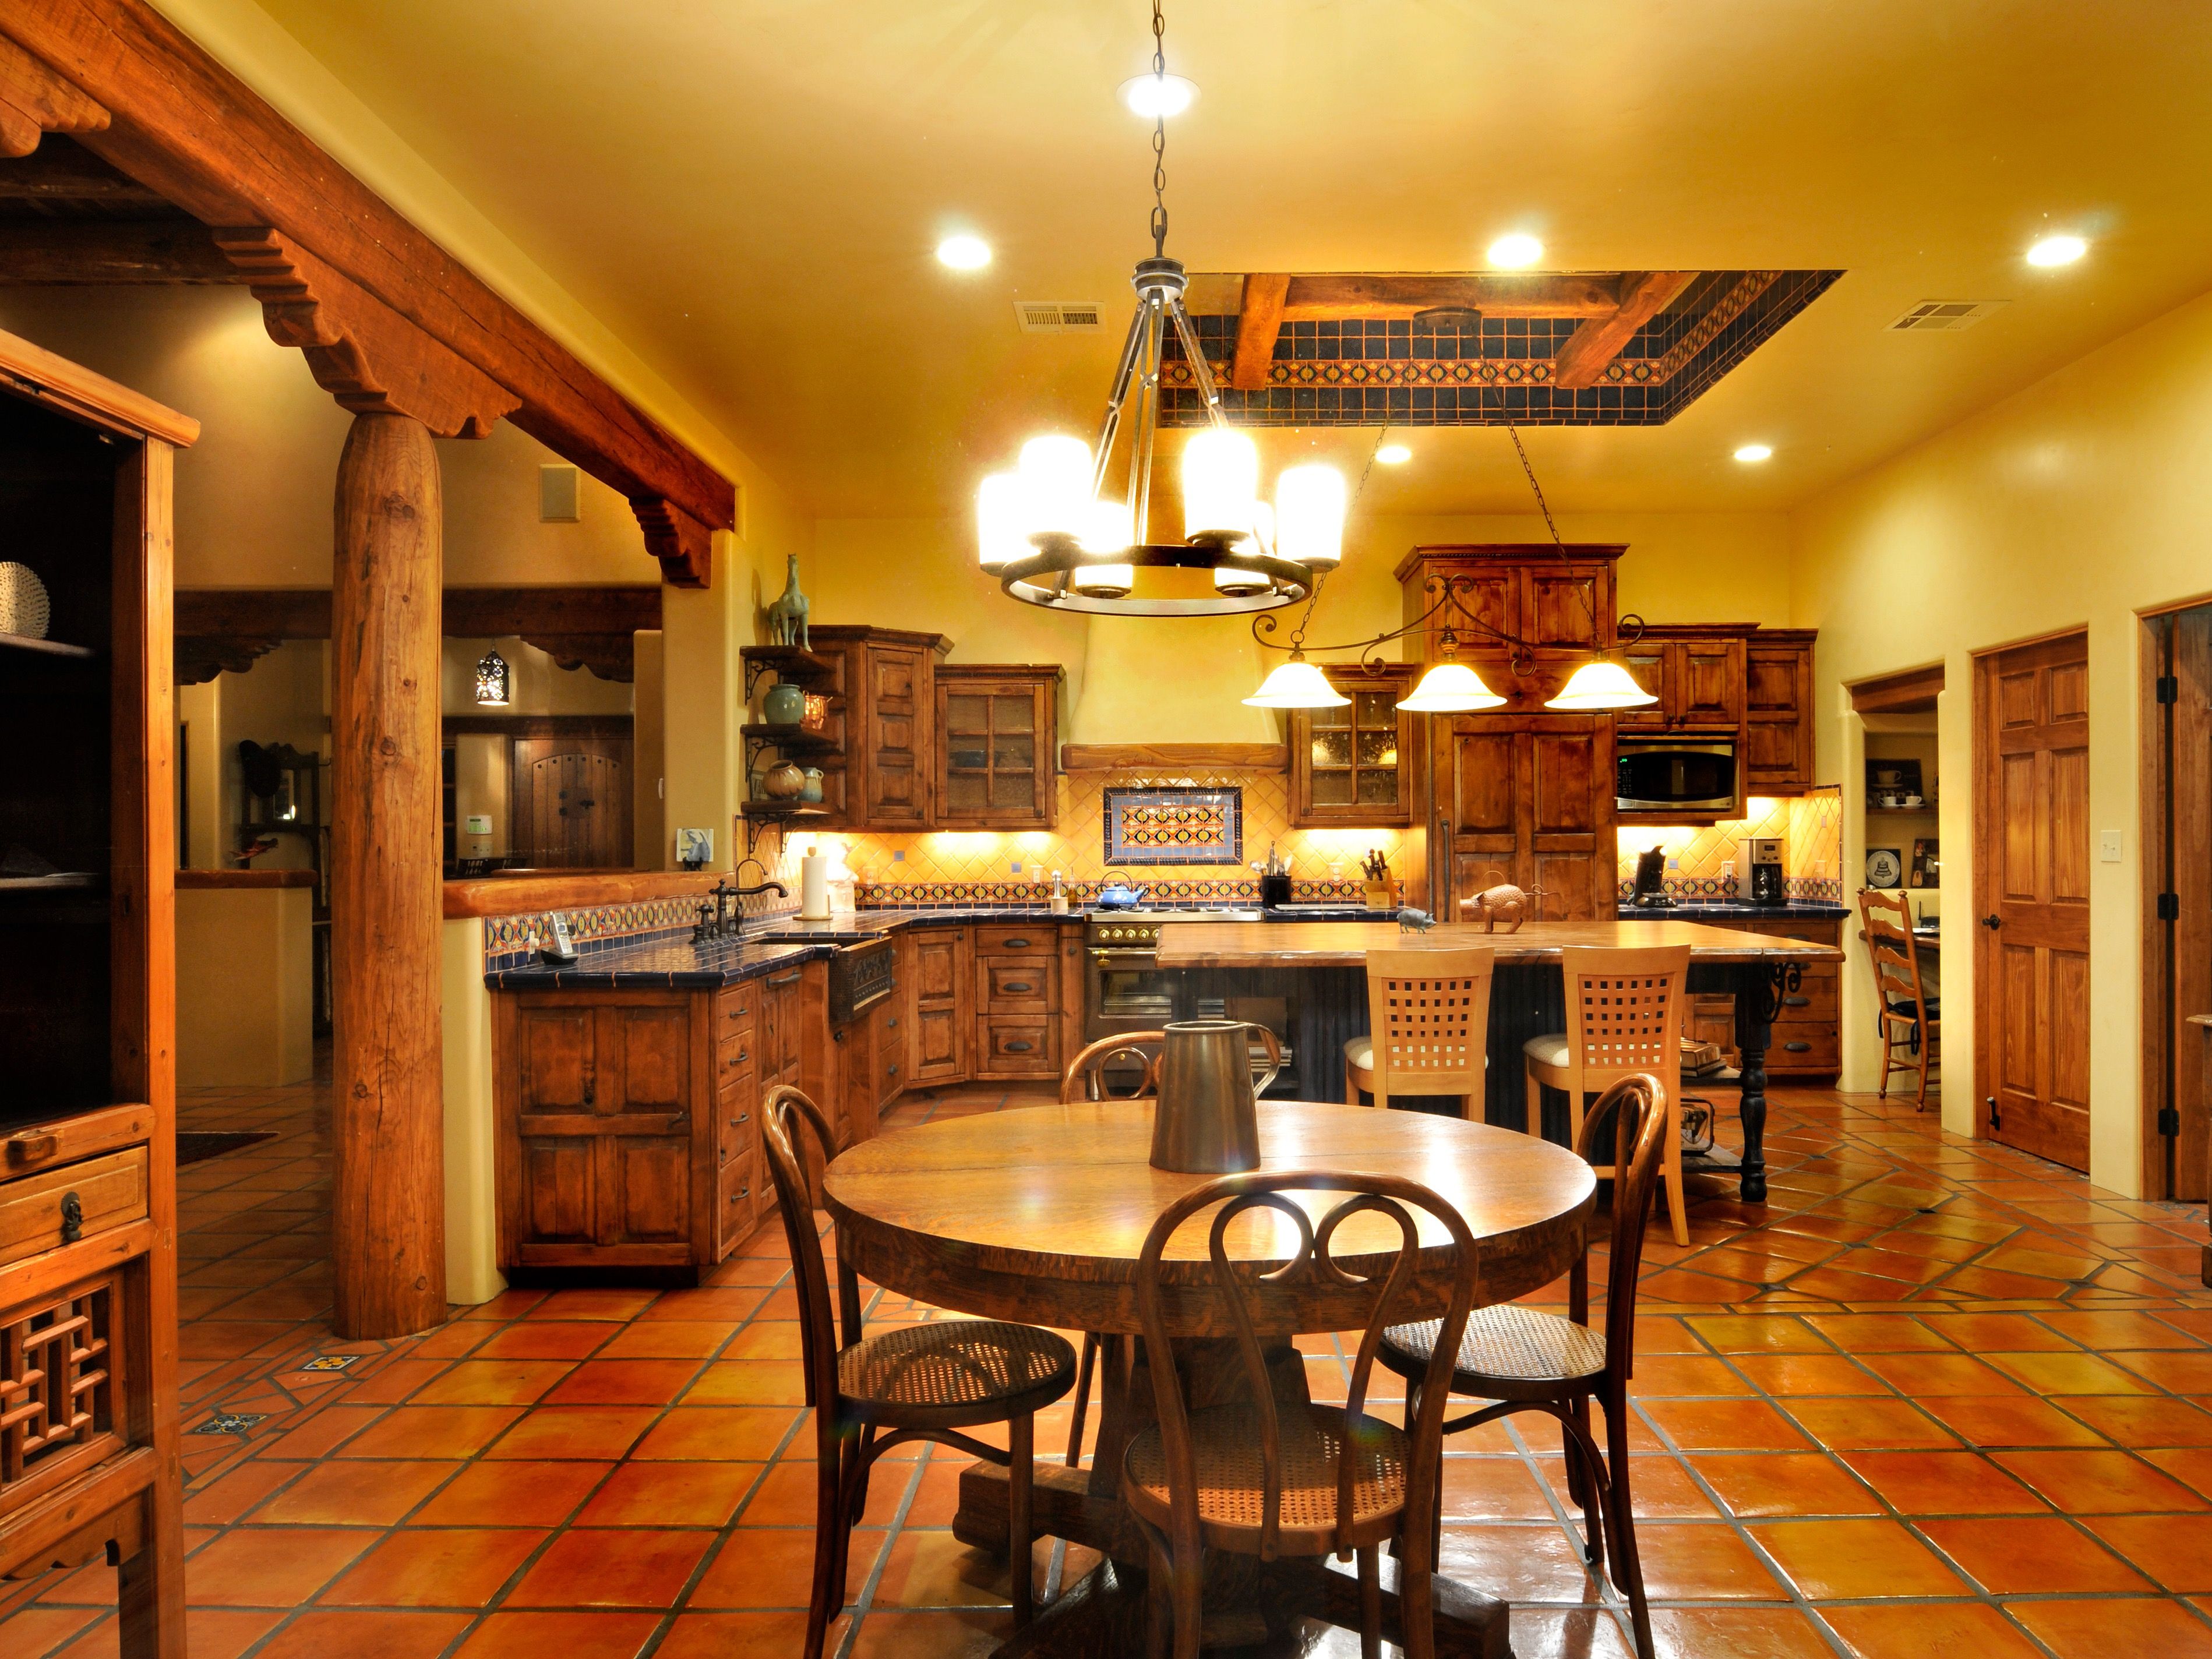 Southwestern Dining Room And Kitchen Interior Combine (View 1 of 11)